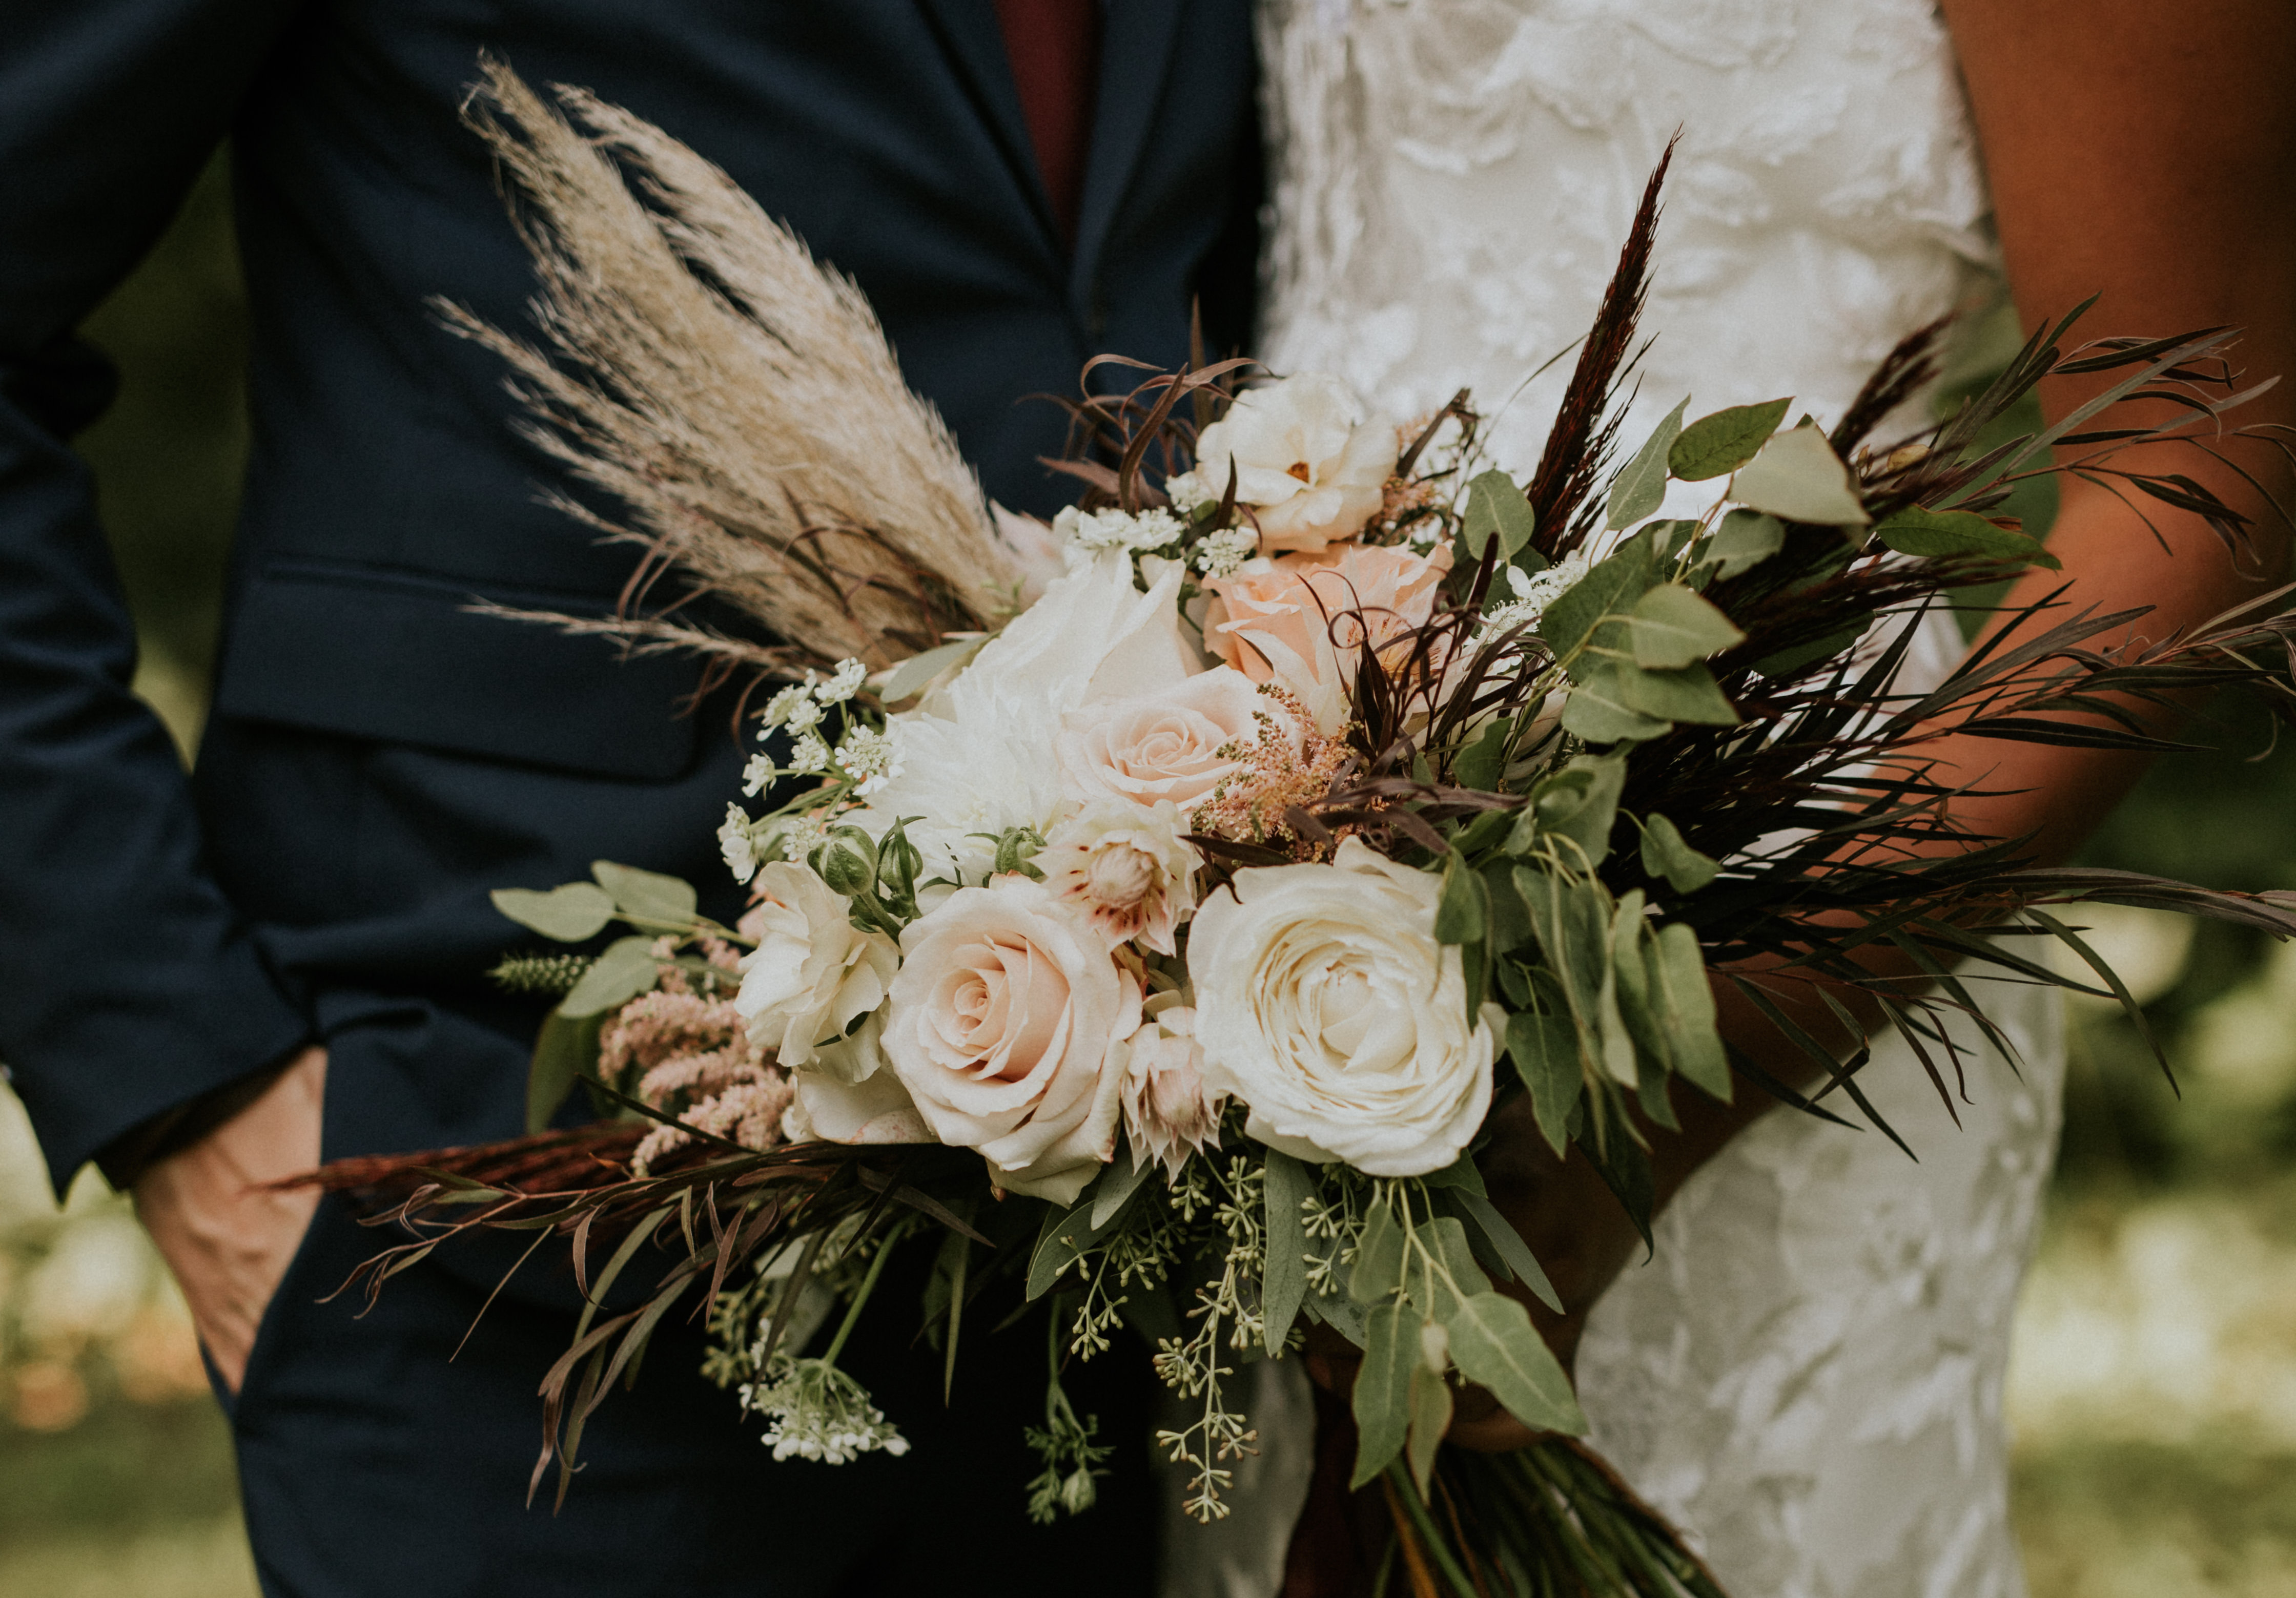 Make The Most of Your Couples' Planning Portal This Event Season